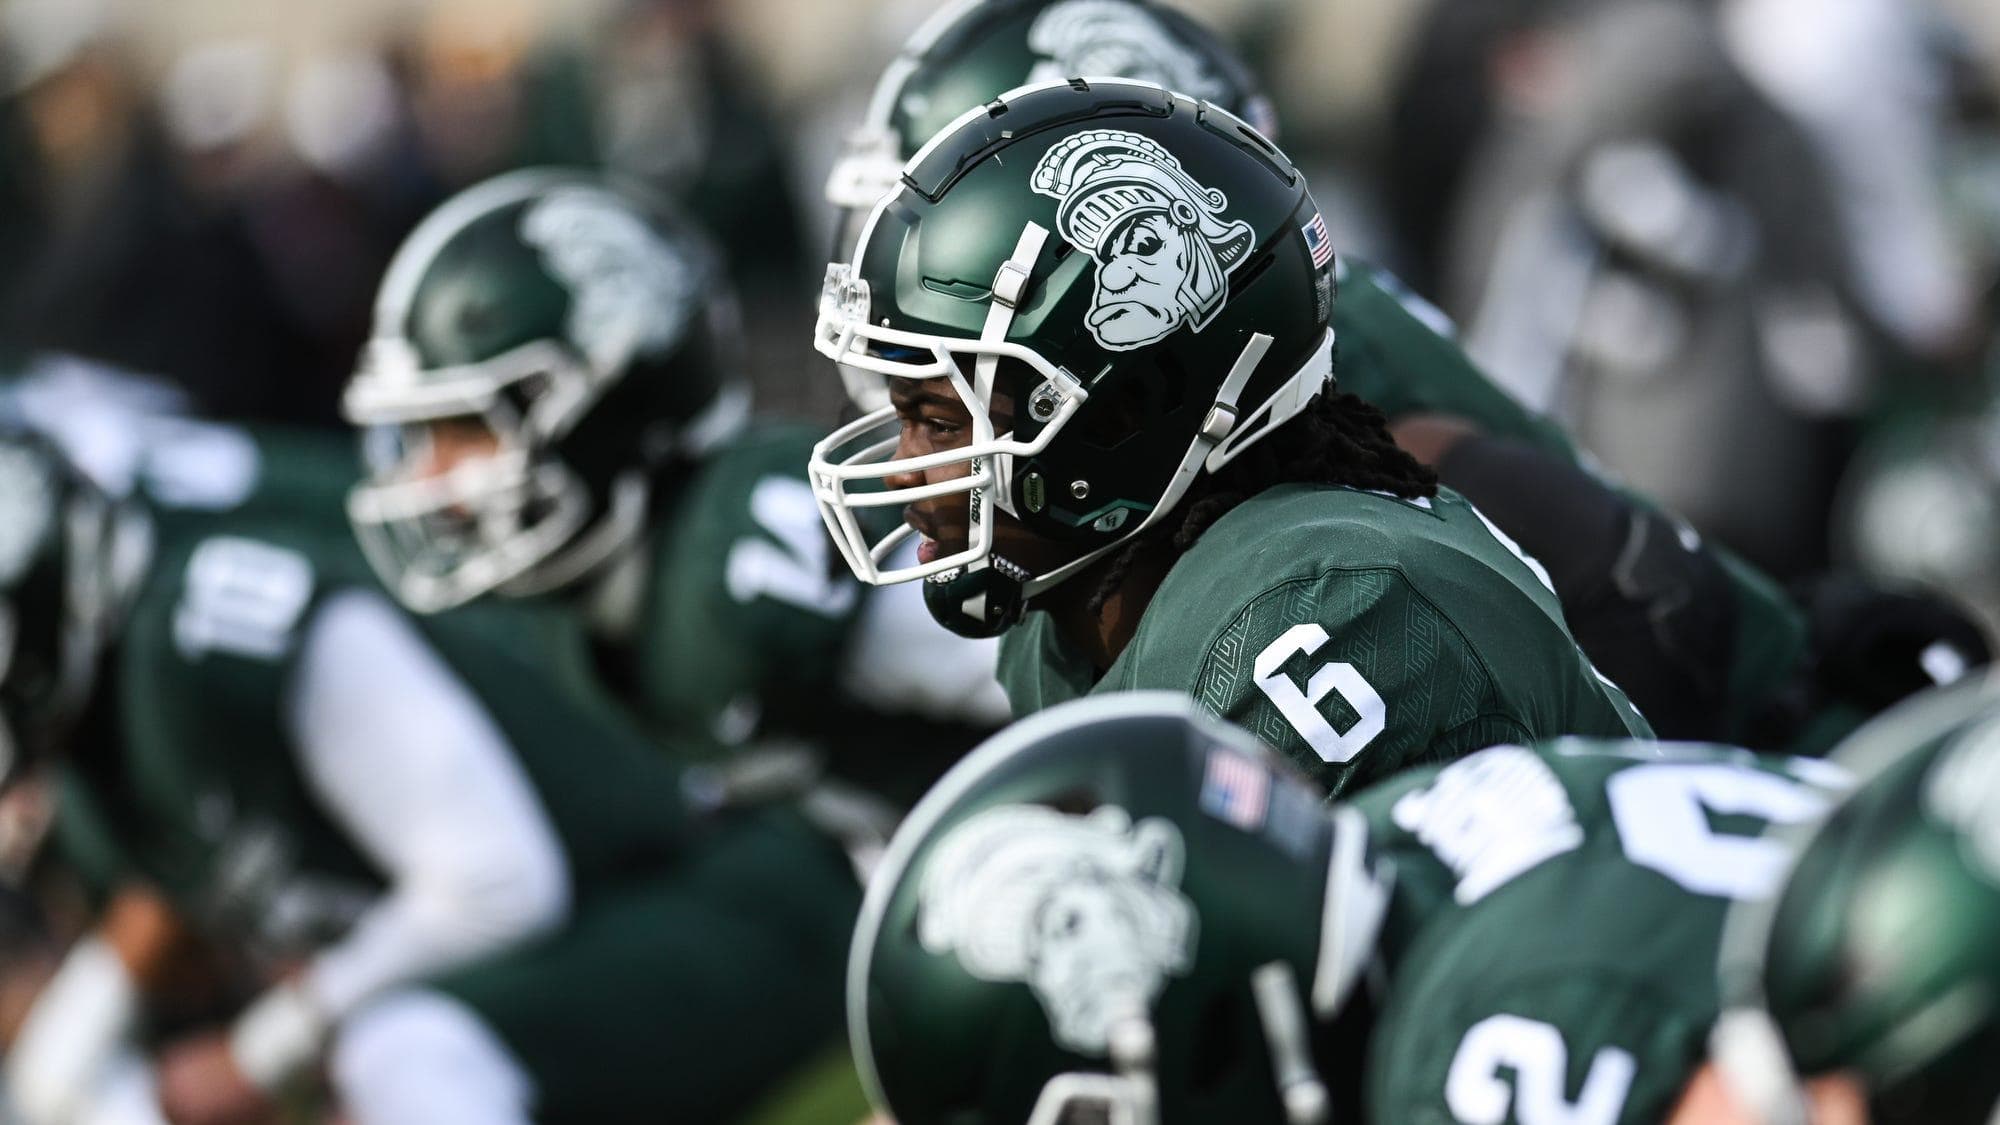 Michigan State Football Has to Get Out of its Slump